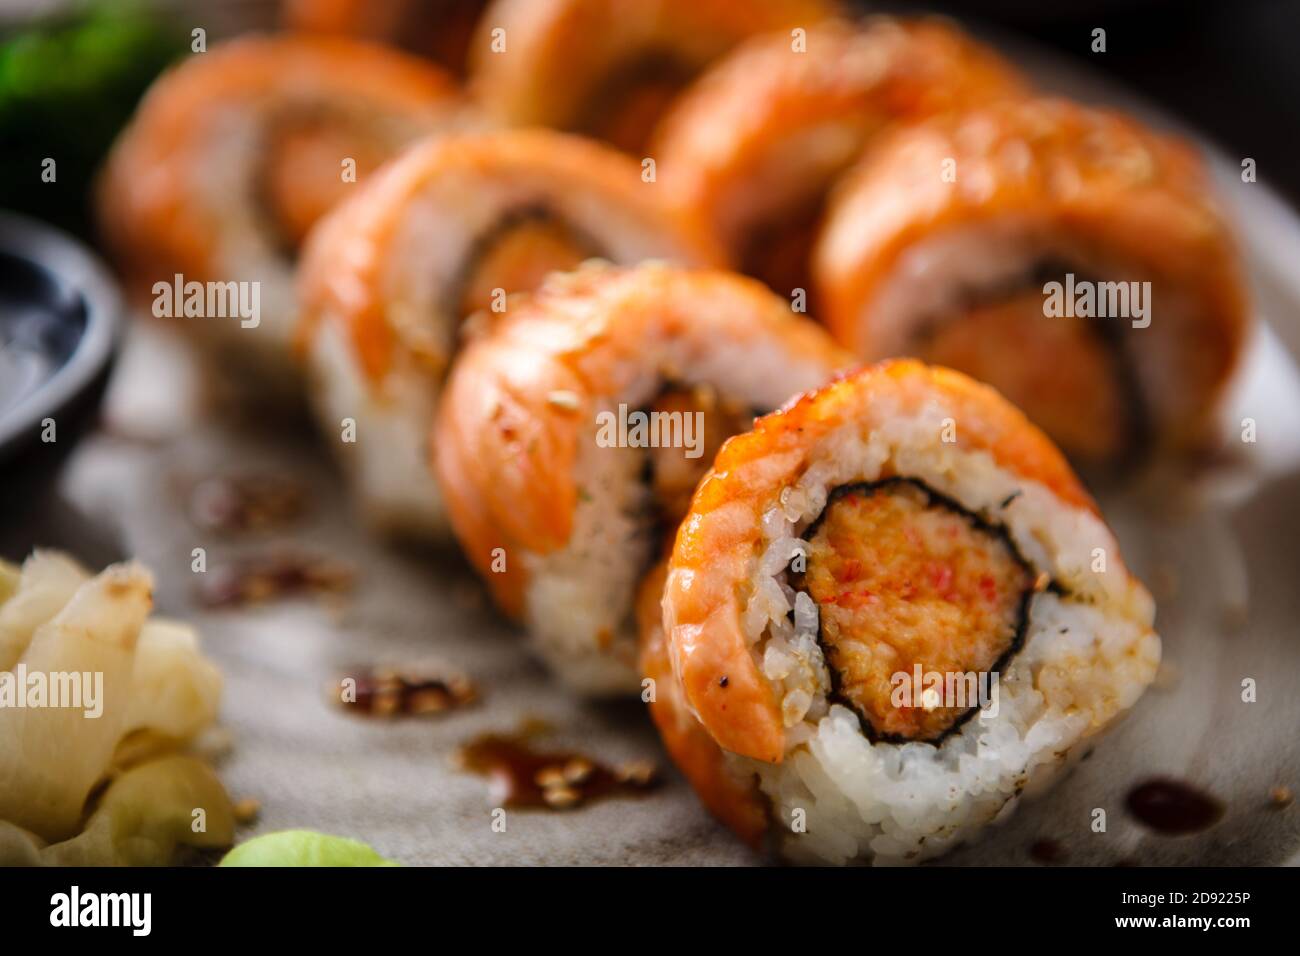 Baked sushi maki rolls with salmon, crab and spicy sauce on a plate with chopsticks, soy sauce, wasabi and ginger. Japanese traditional fish food Stock Photo